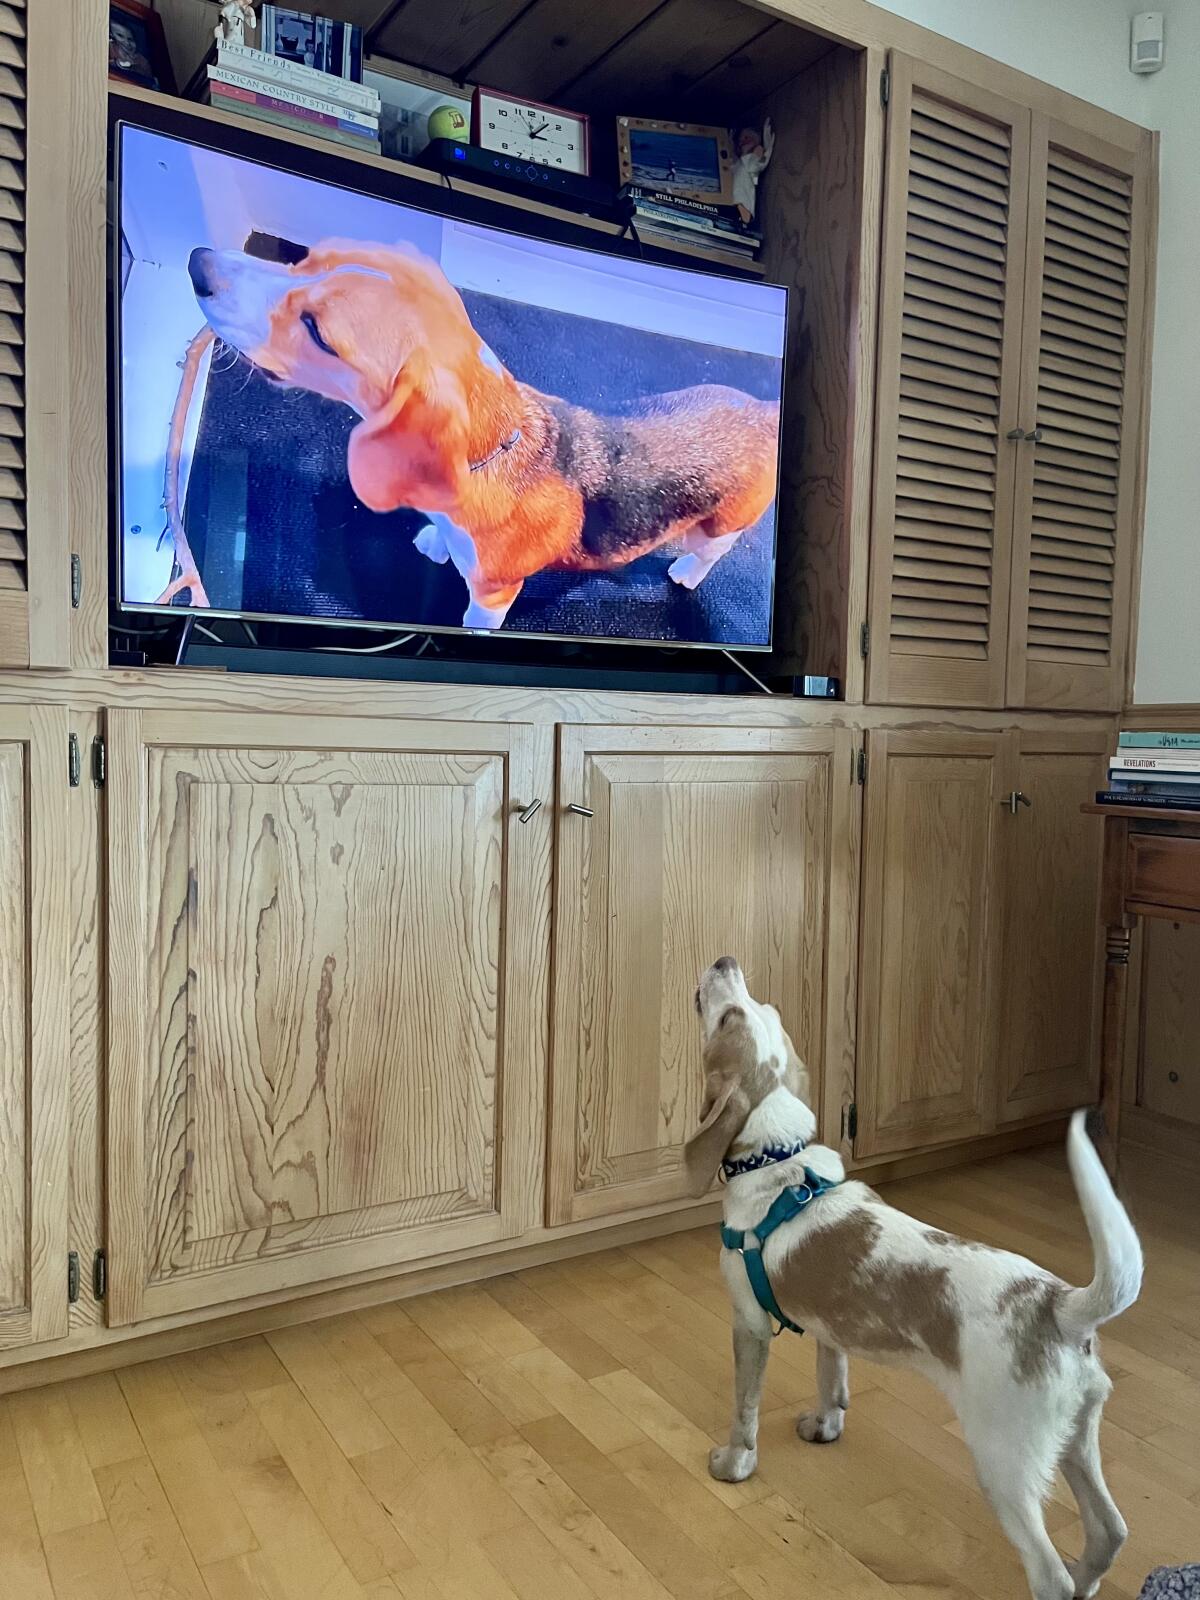 Philly loves watching television, especially if dogs are involved.